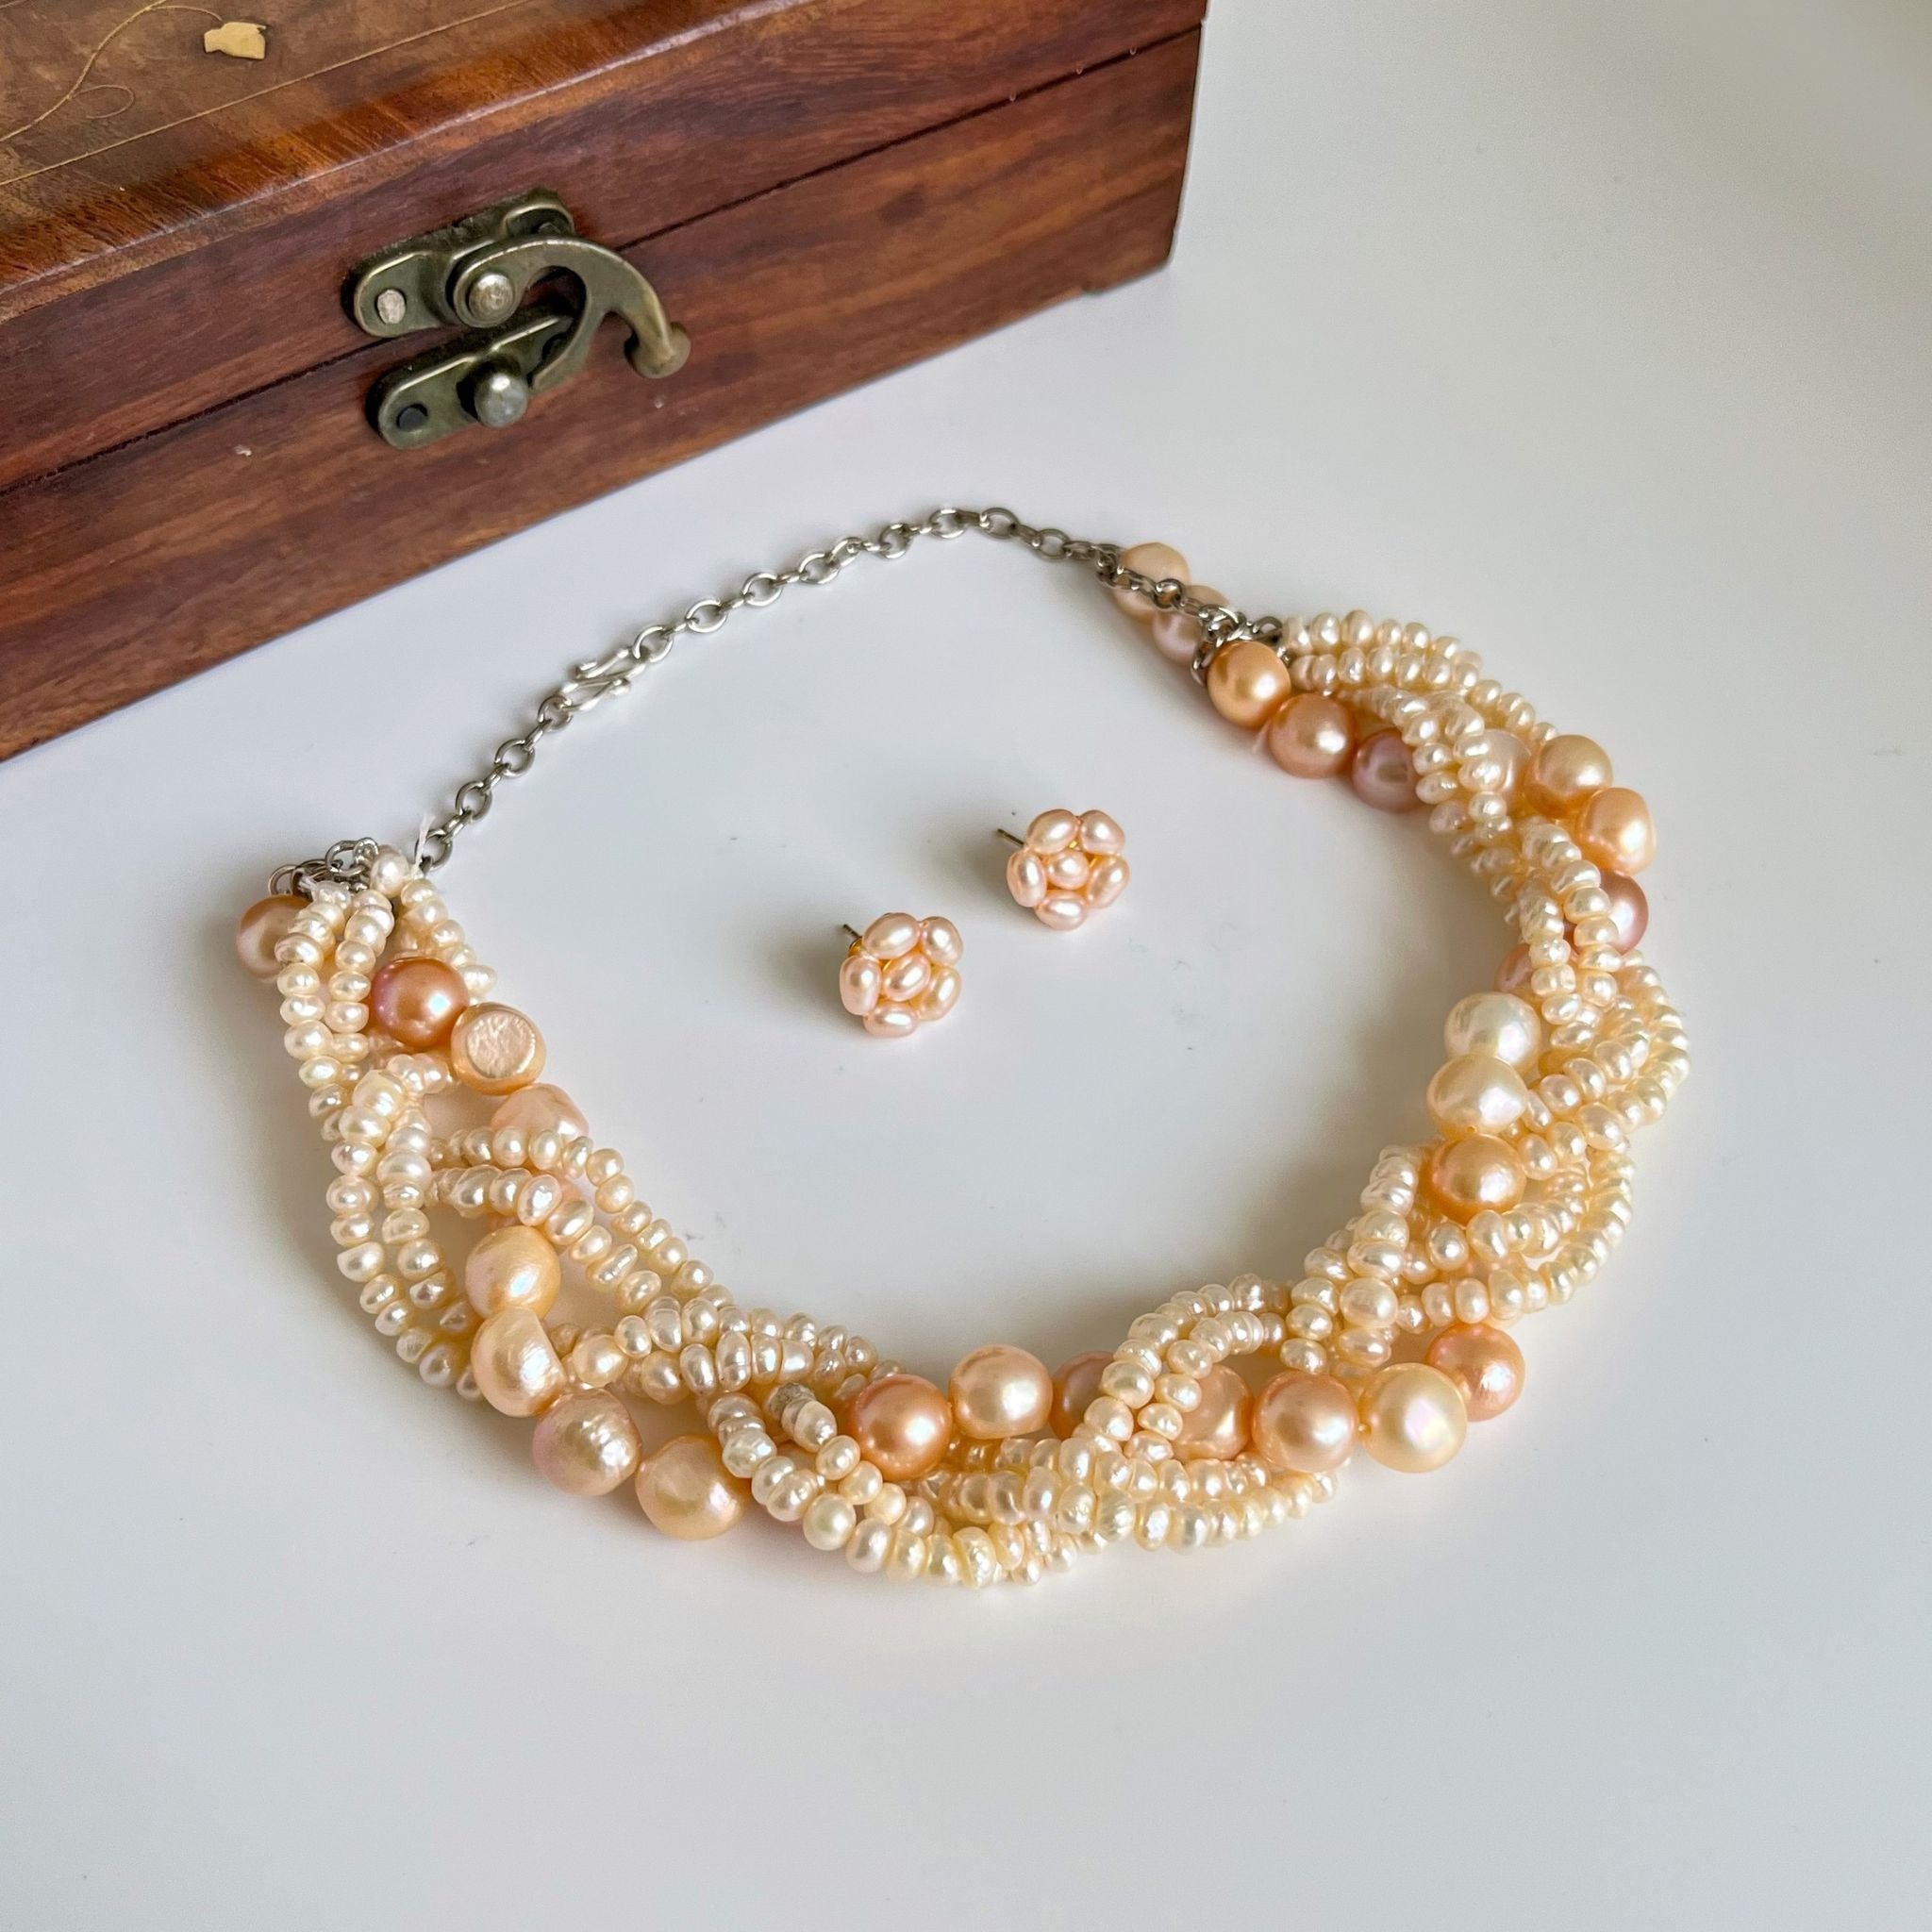 The Swirl • Beautiful Vintage Pearl Necklace With White Gold Clasp, Germany  Circa 1965 • Hofer Antikschmuck